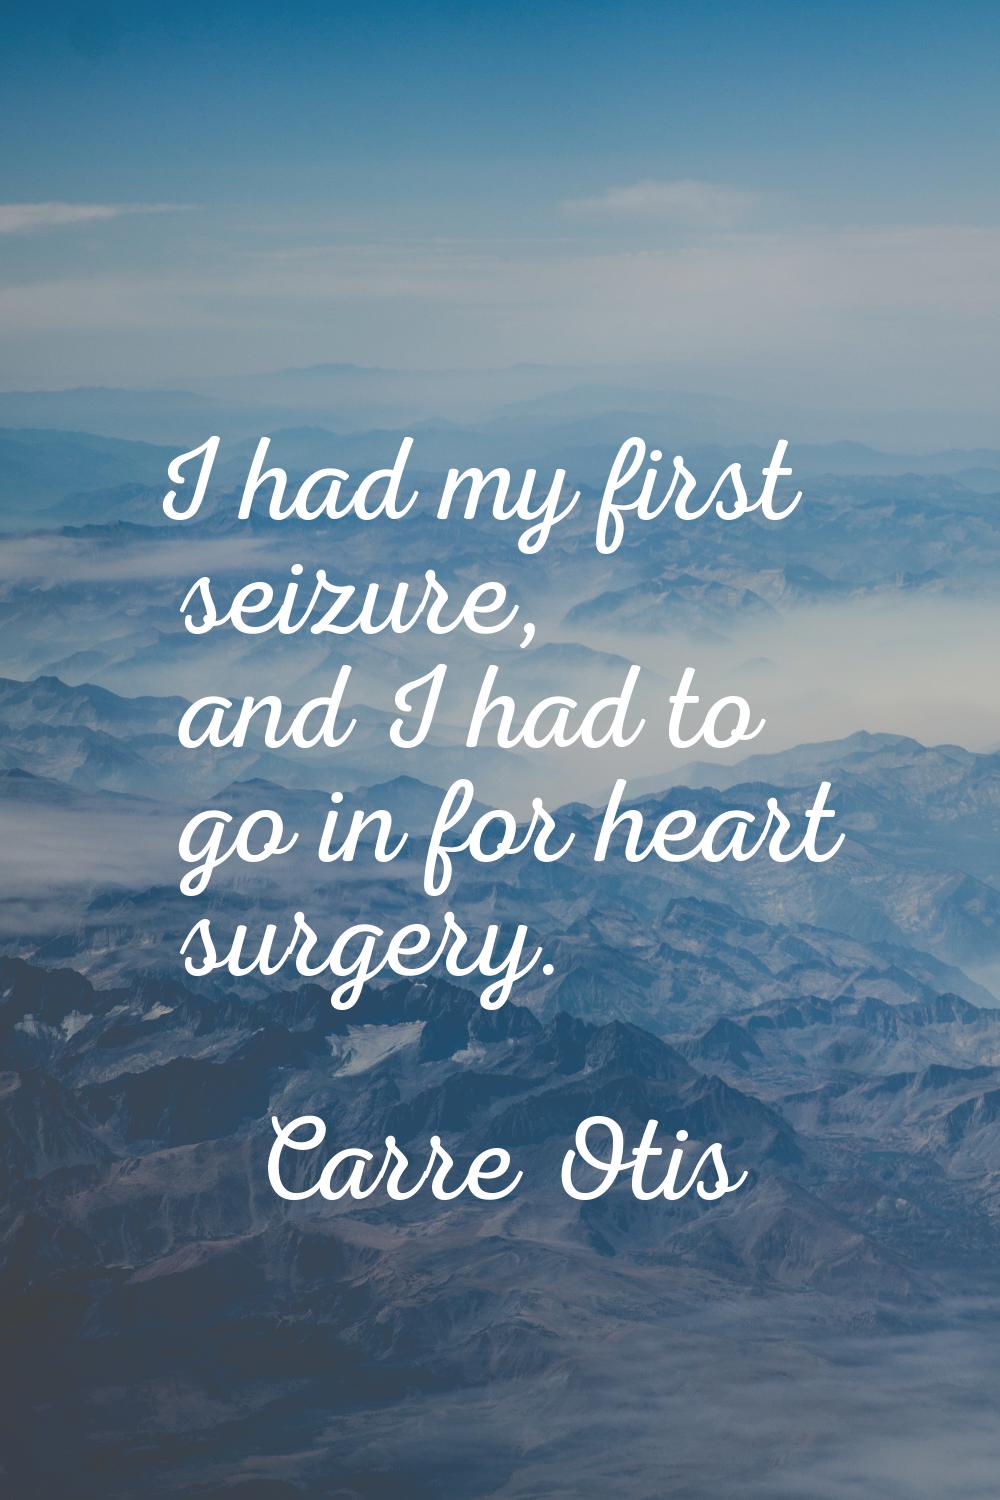 I had my first seizure, and I had to go in for heart surgery.